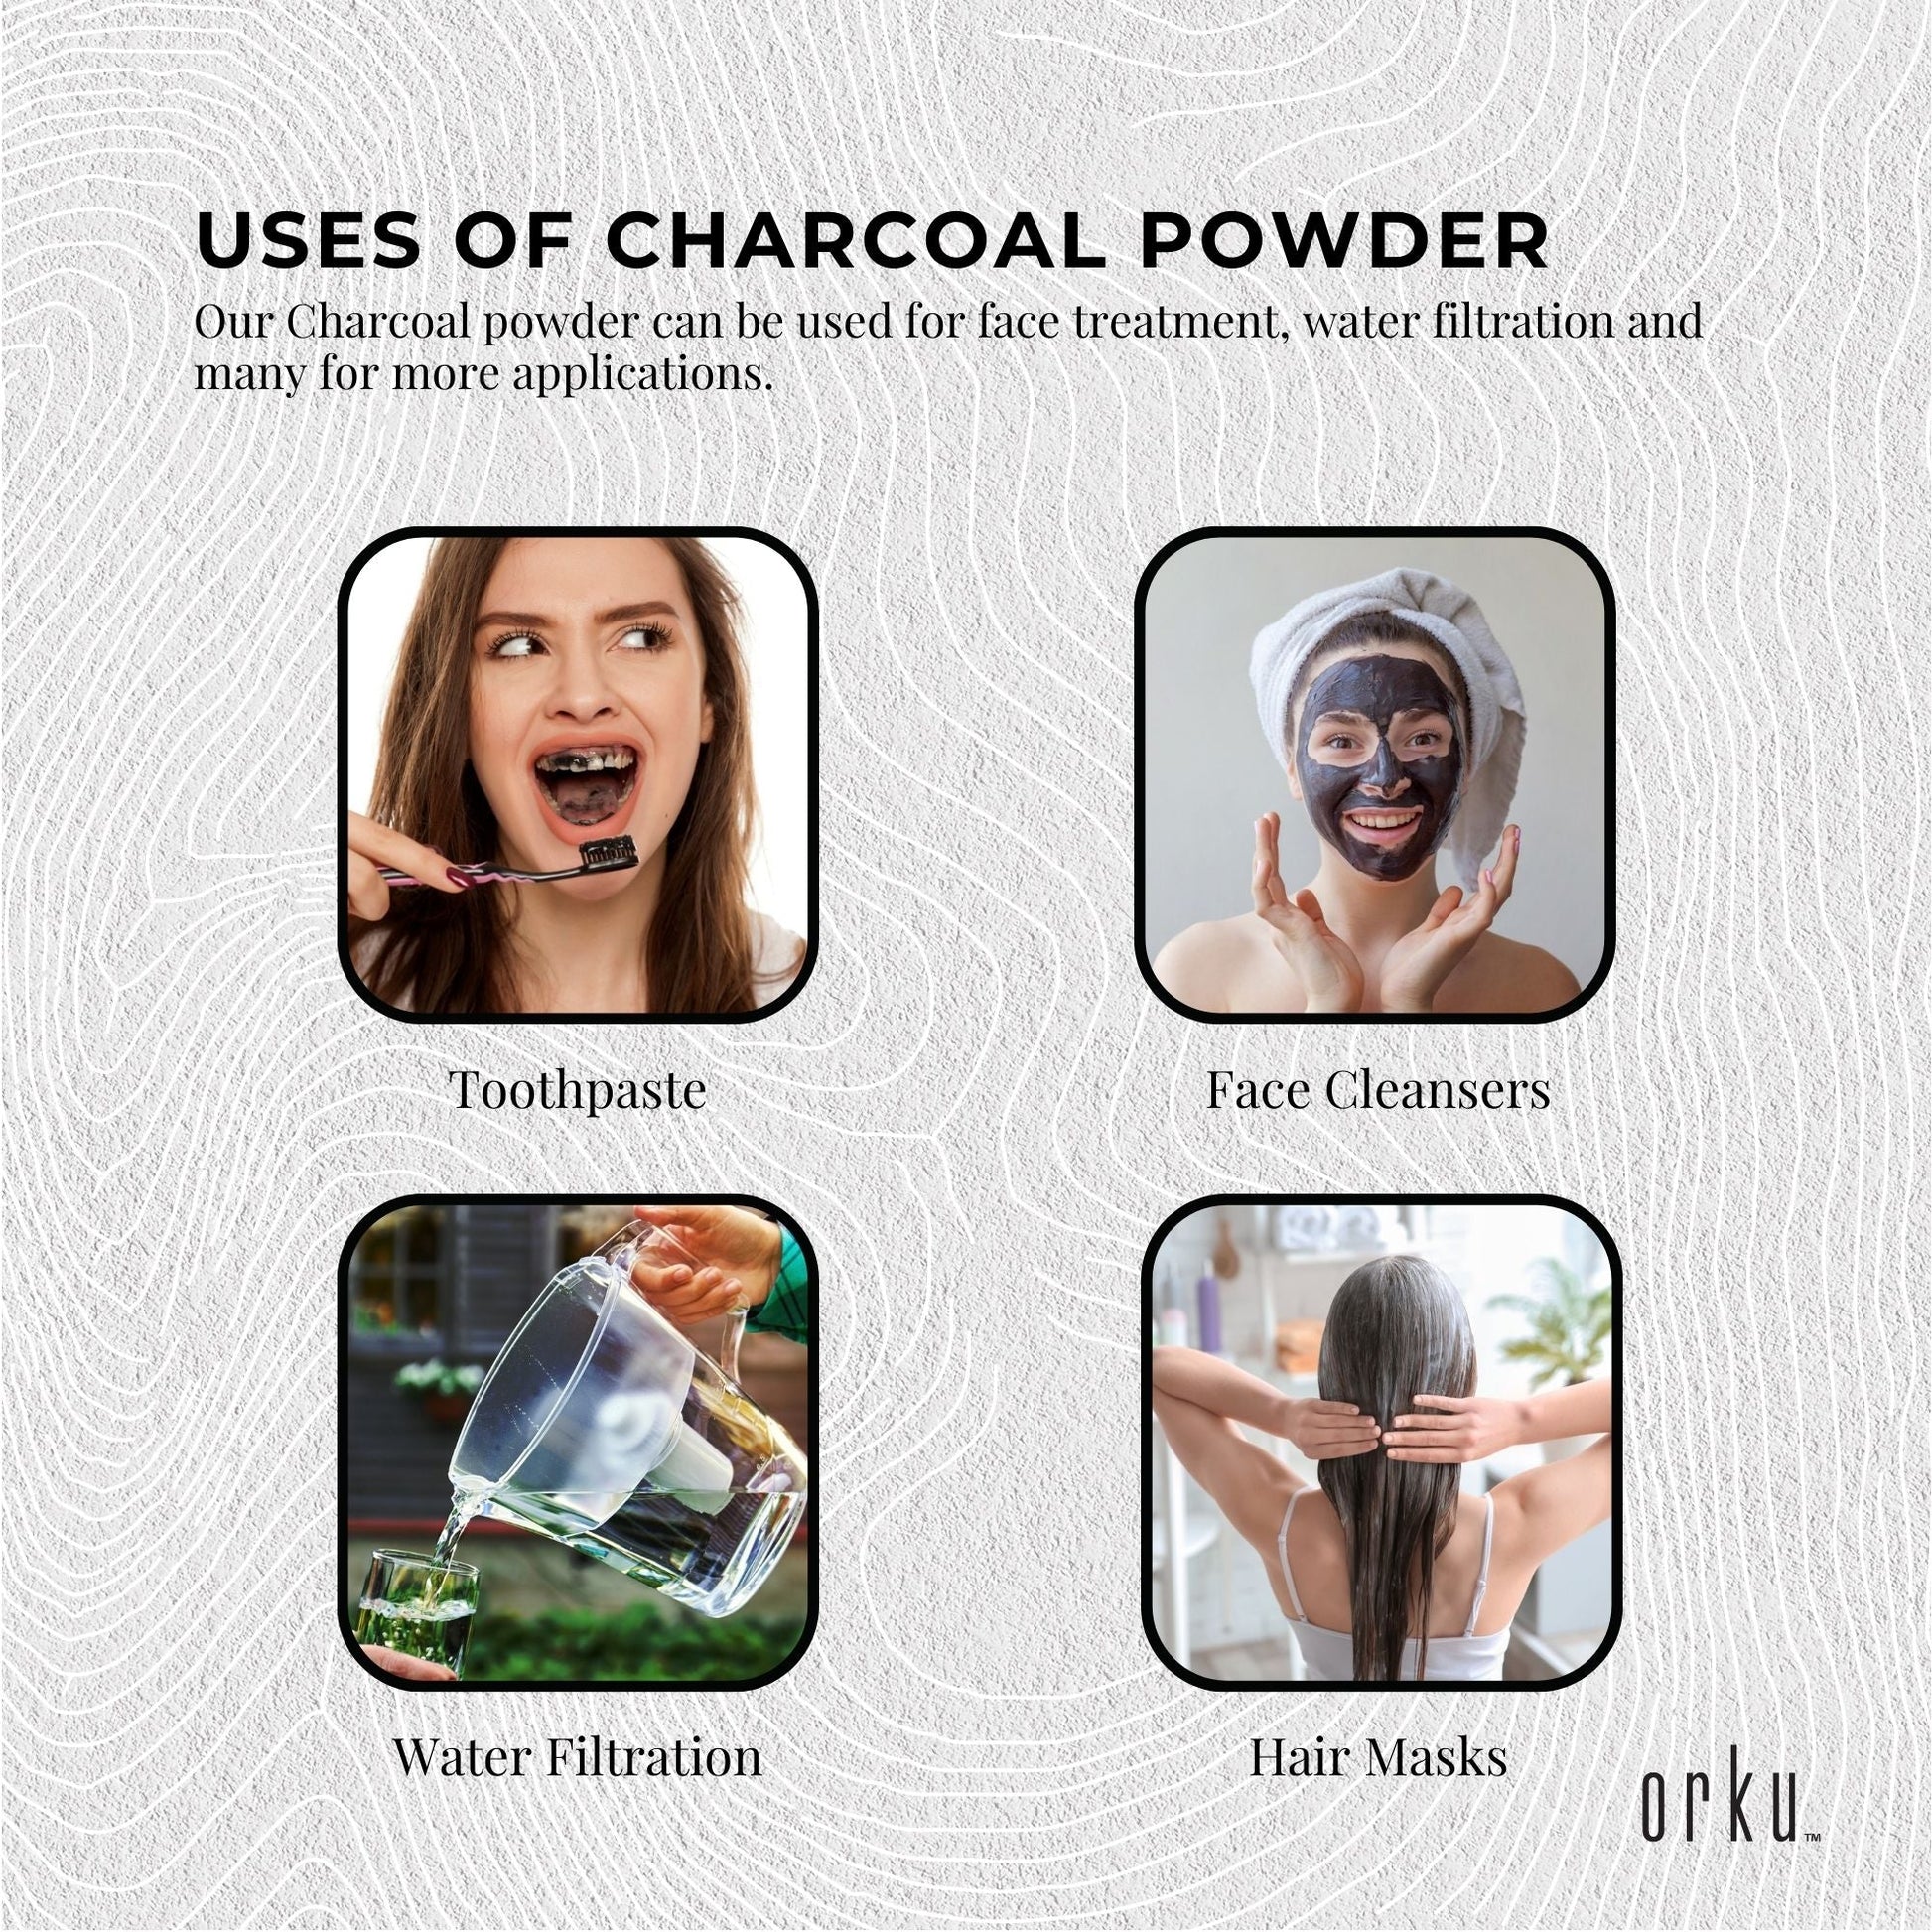 10g Activated Carbon Powder Coconut Charcoal - Teeth Whitening + Skin